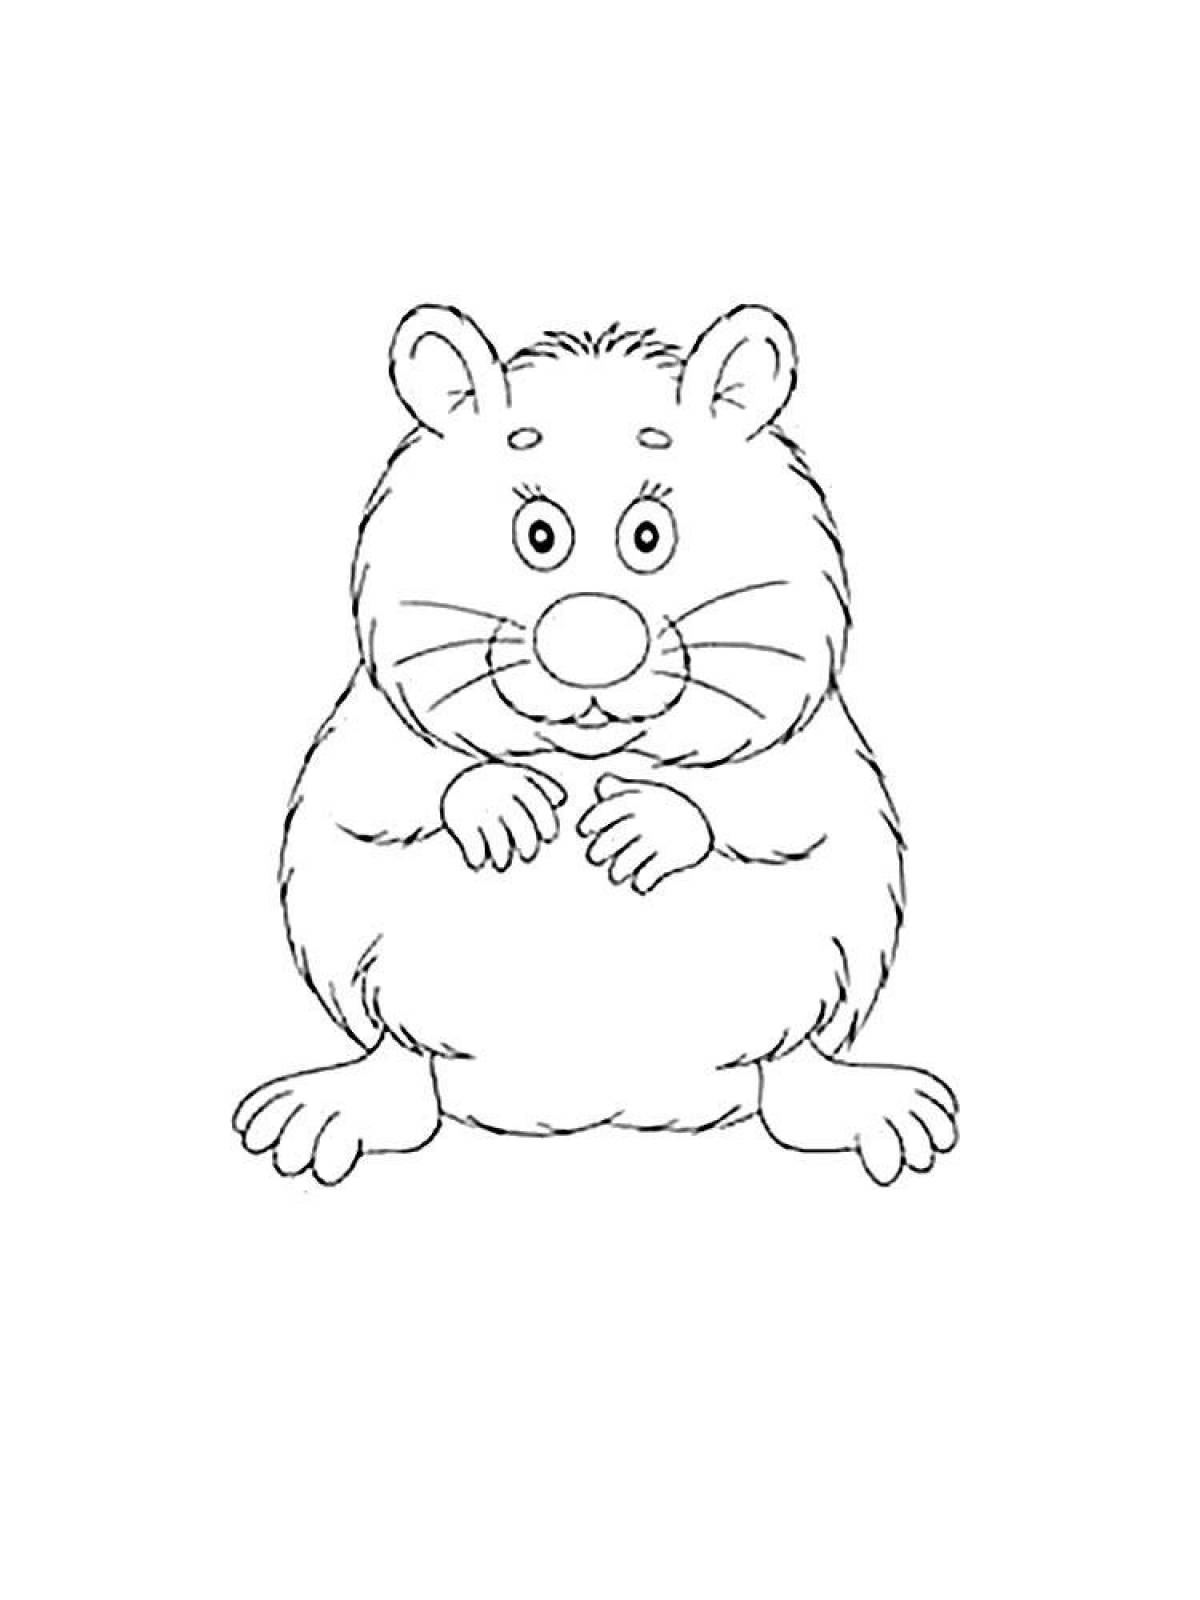 Amazing hamster coloring page for kids